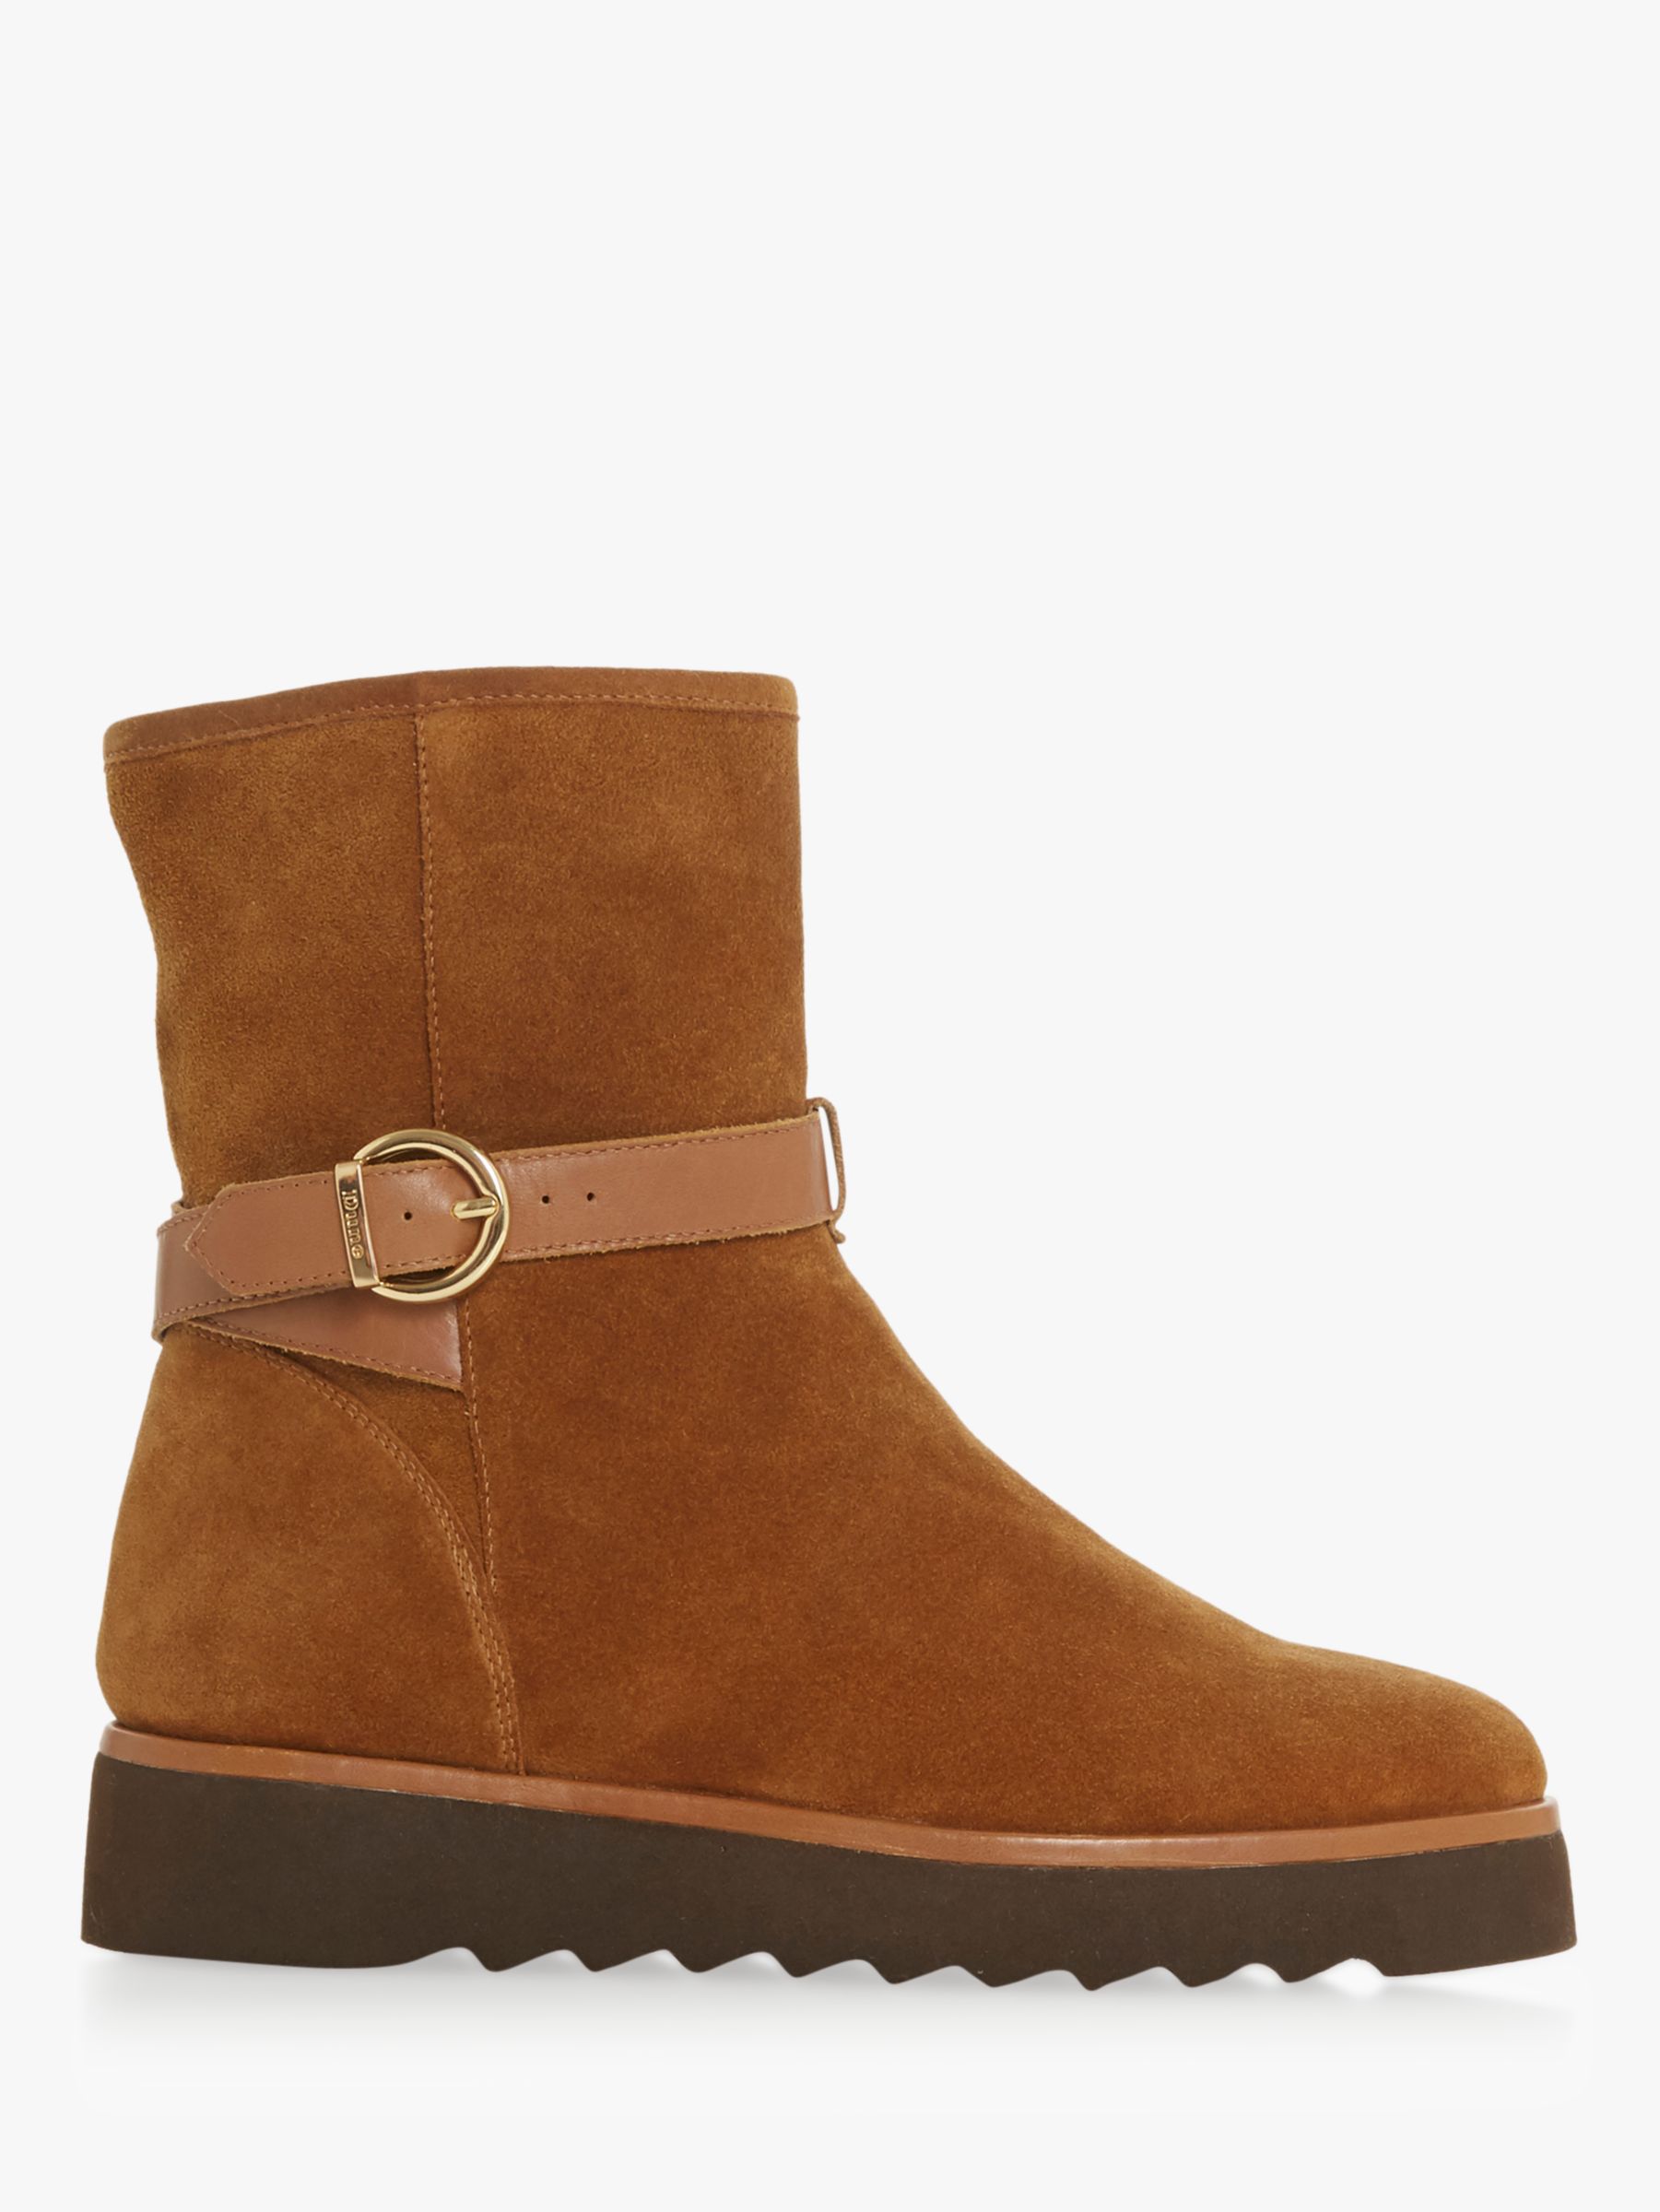 Dune Pinata Suede Boots, Tan